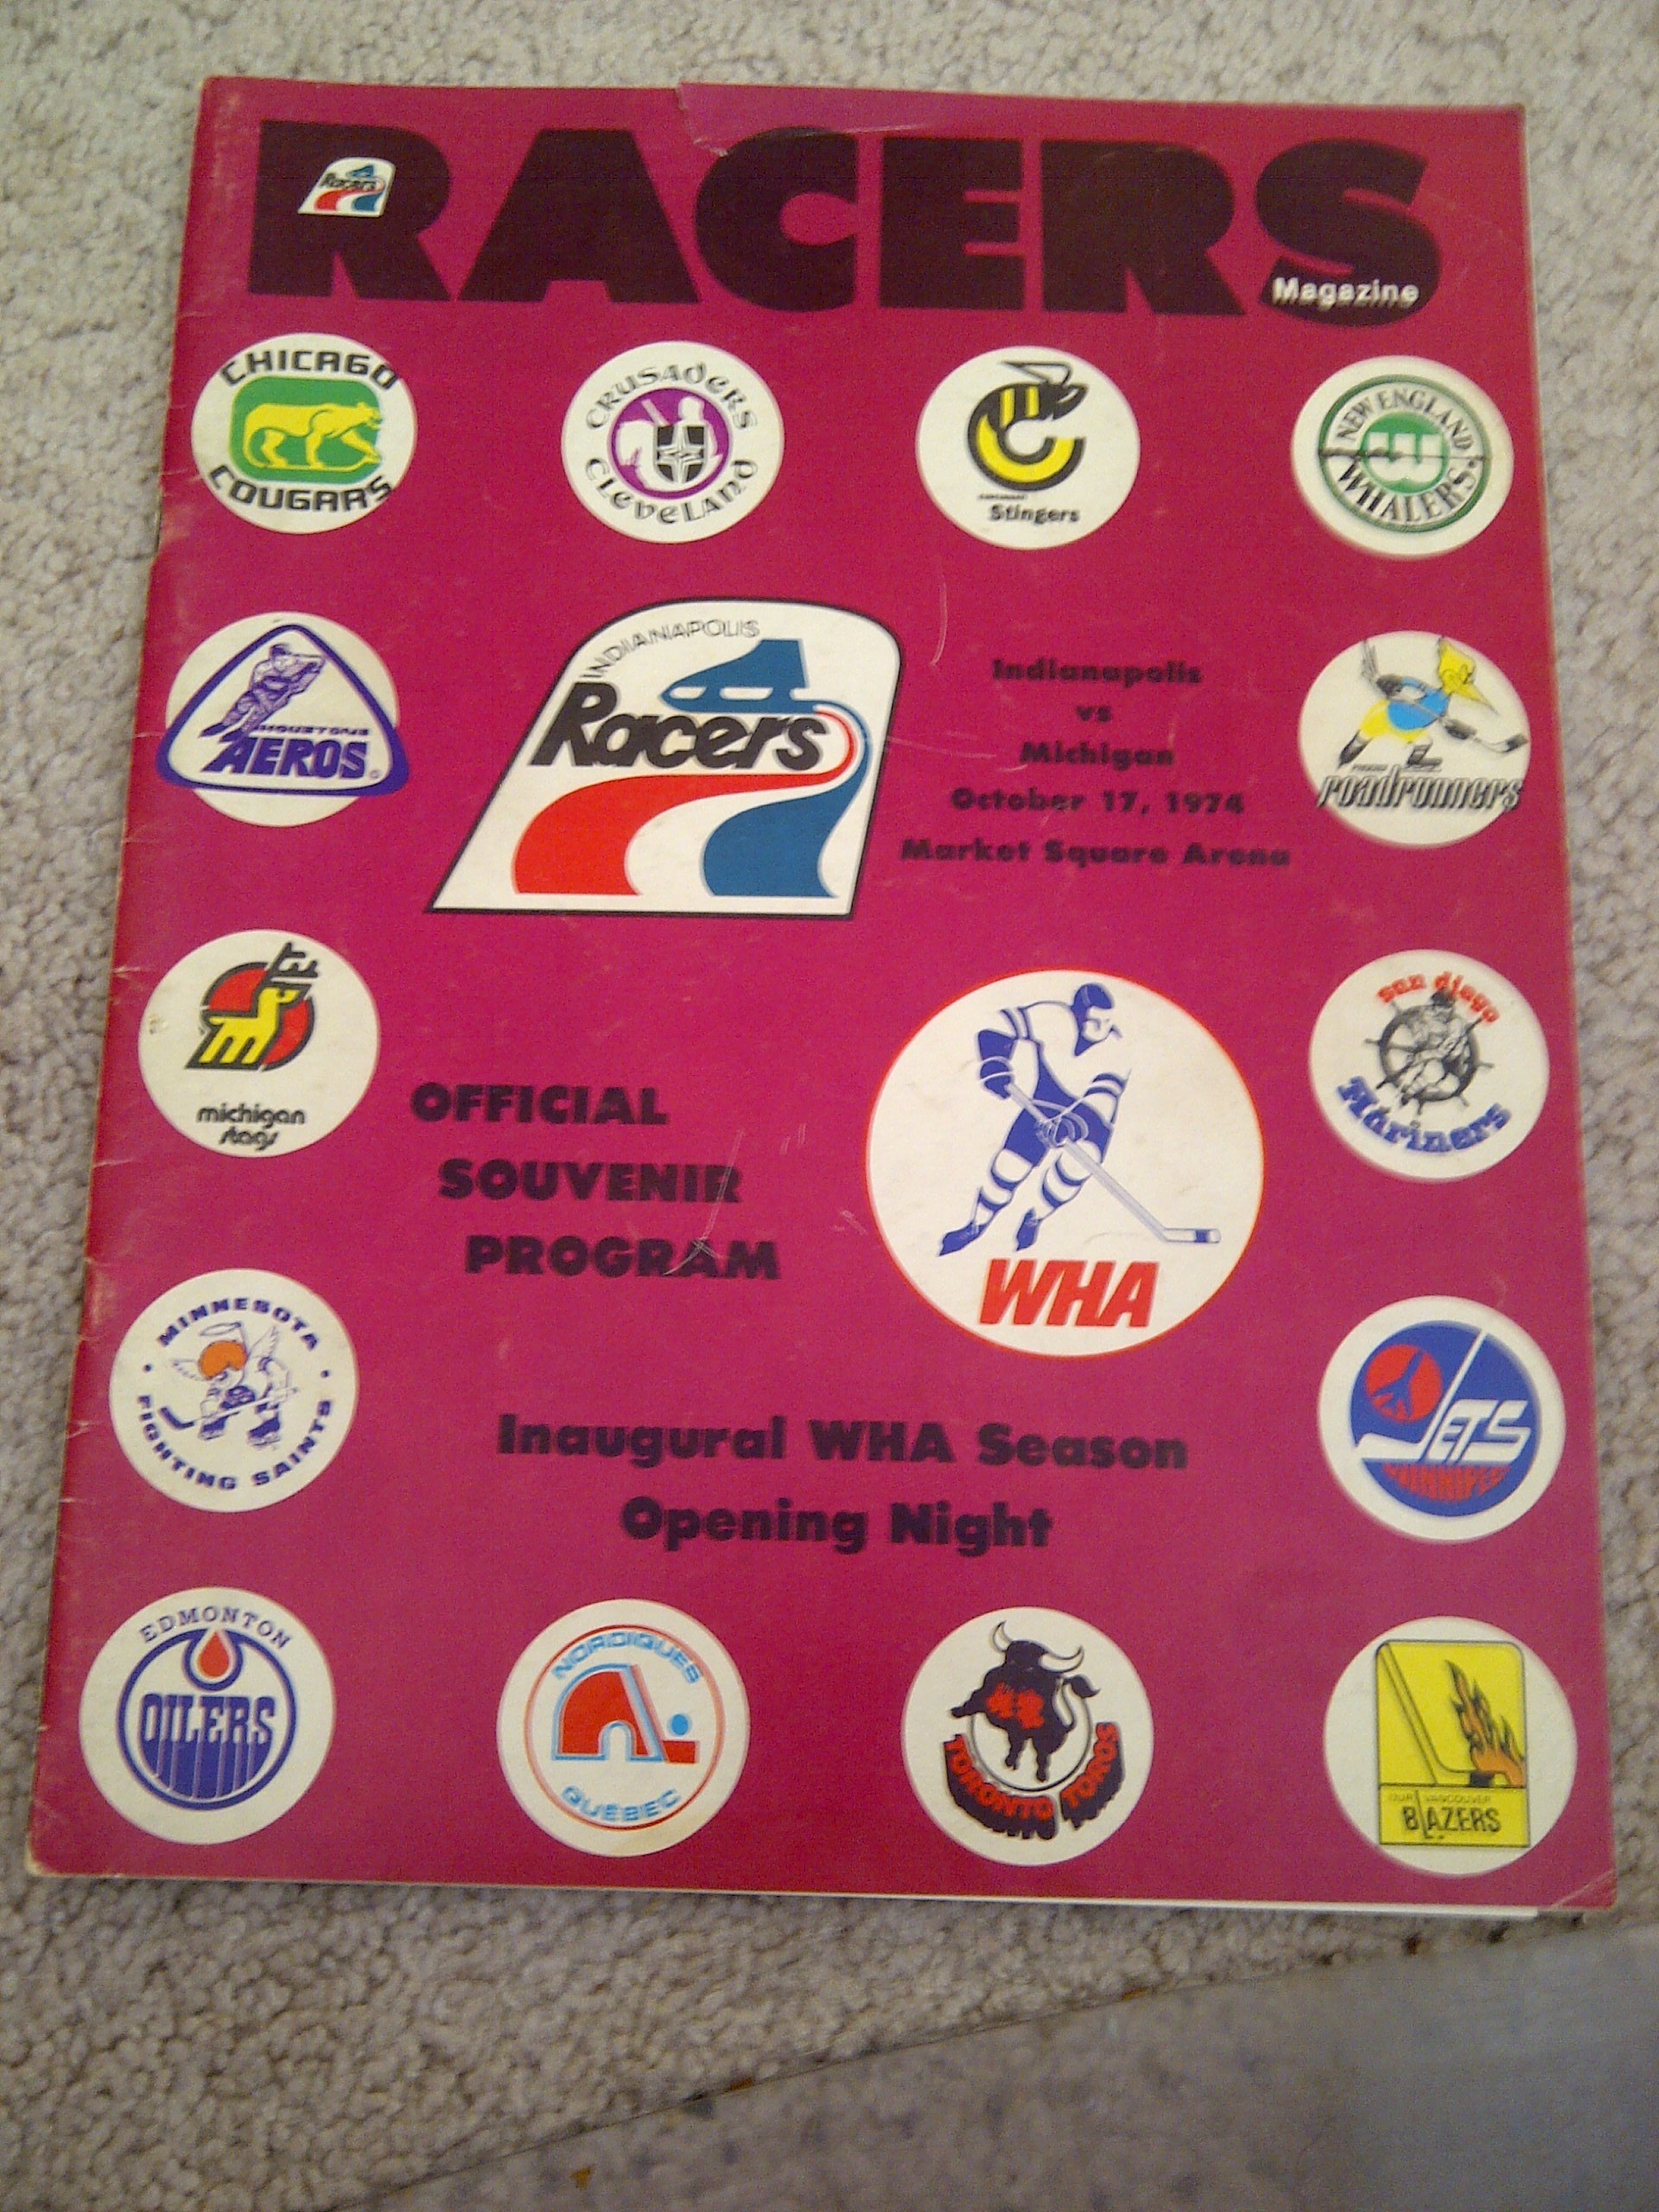 The program from the first game in Indianapolis Racers history.